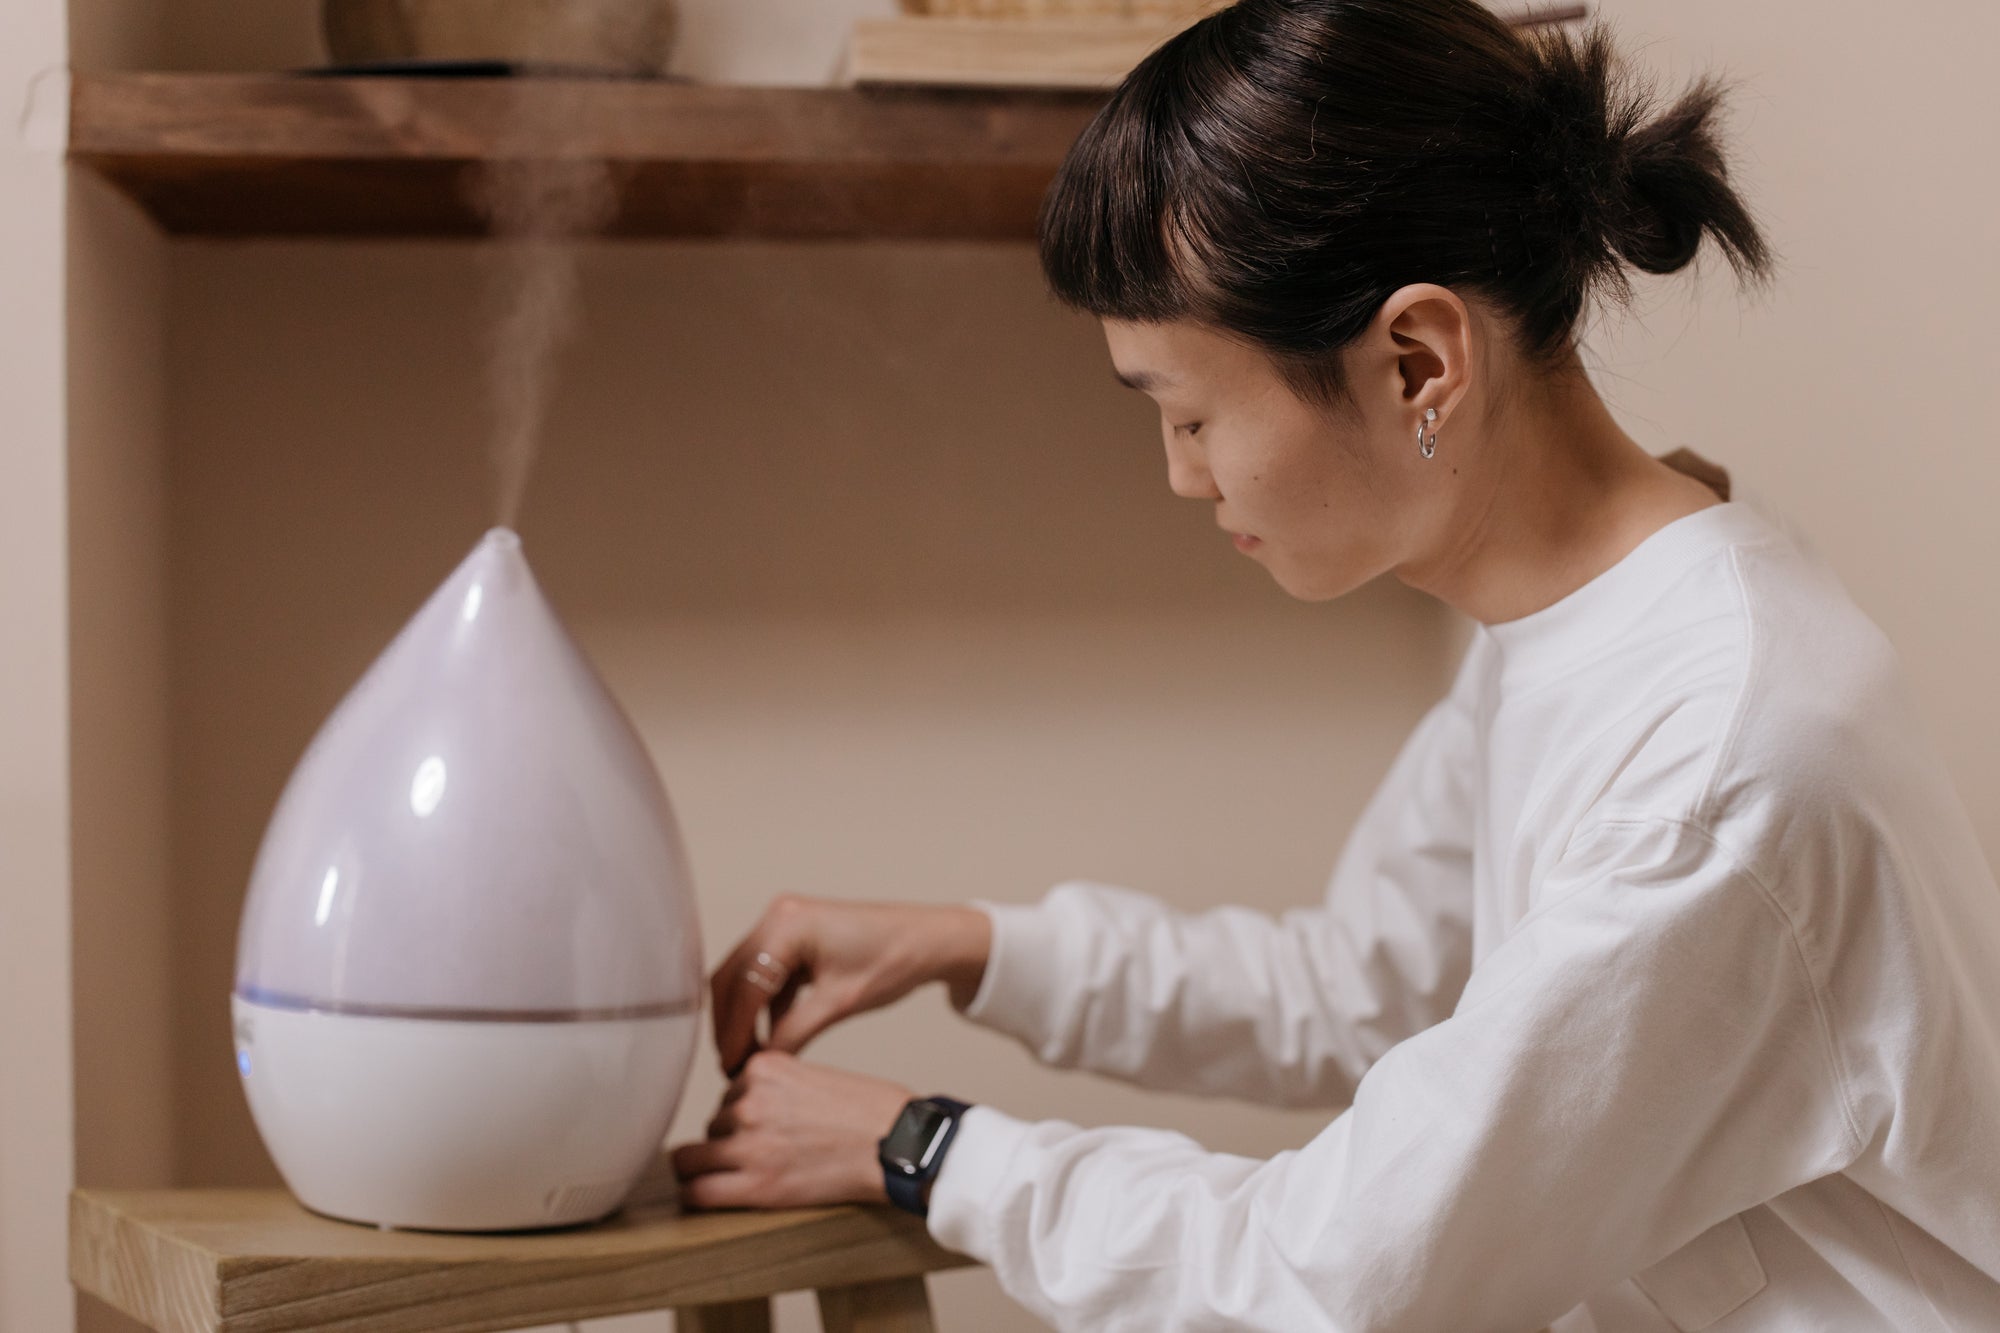 How to Clean Humidifier: Essential Maintenance Tips